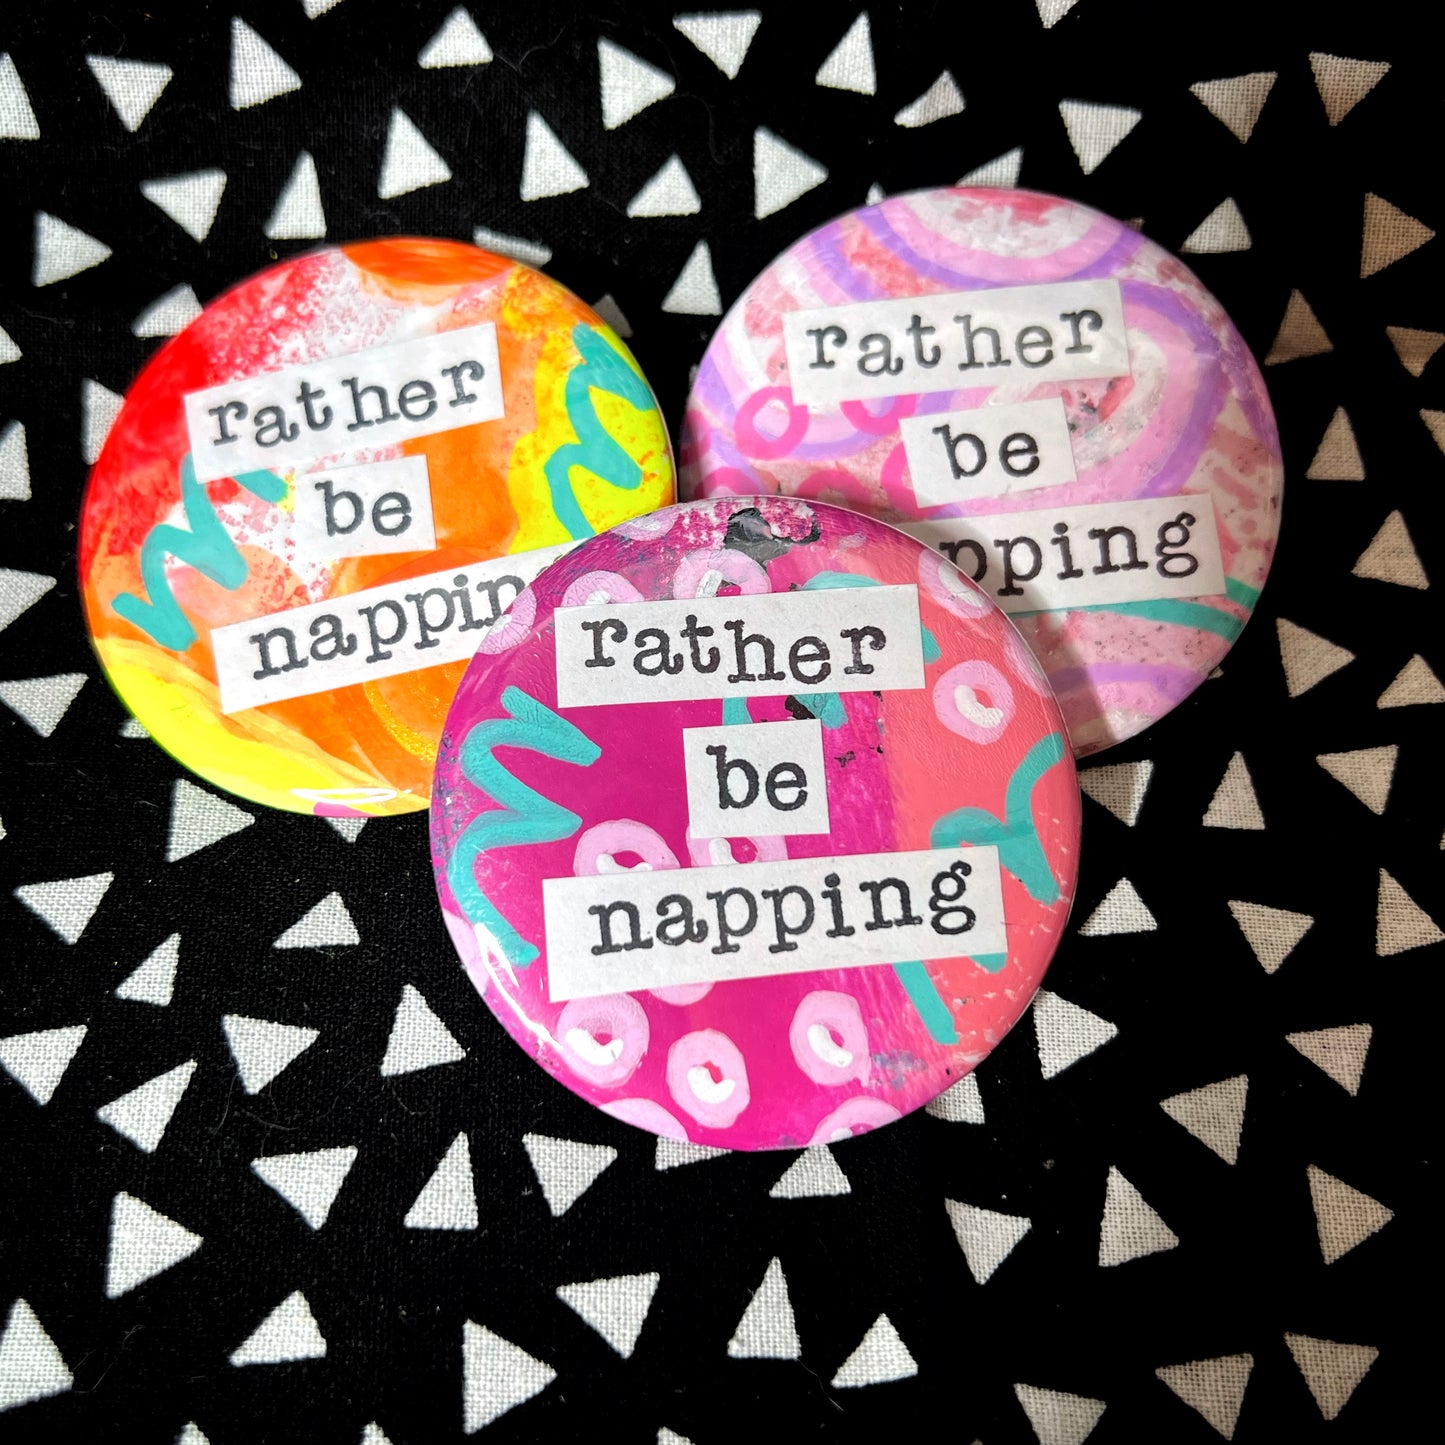 "rather be napping" - large art pin / magnet